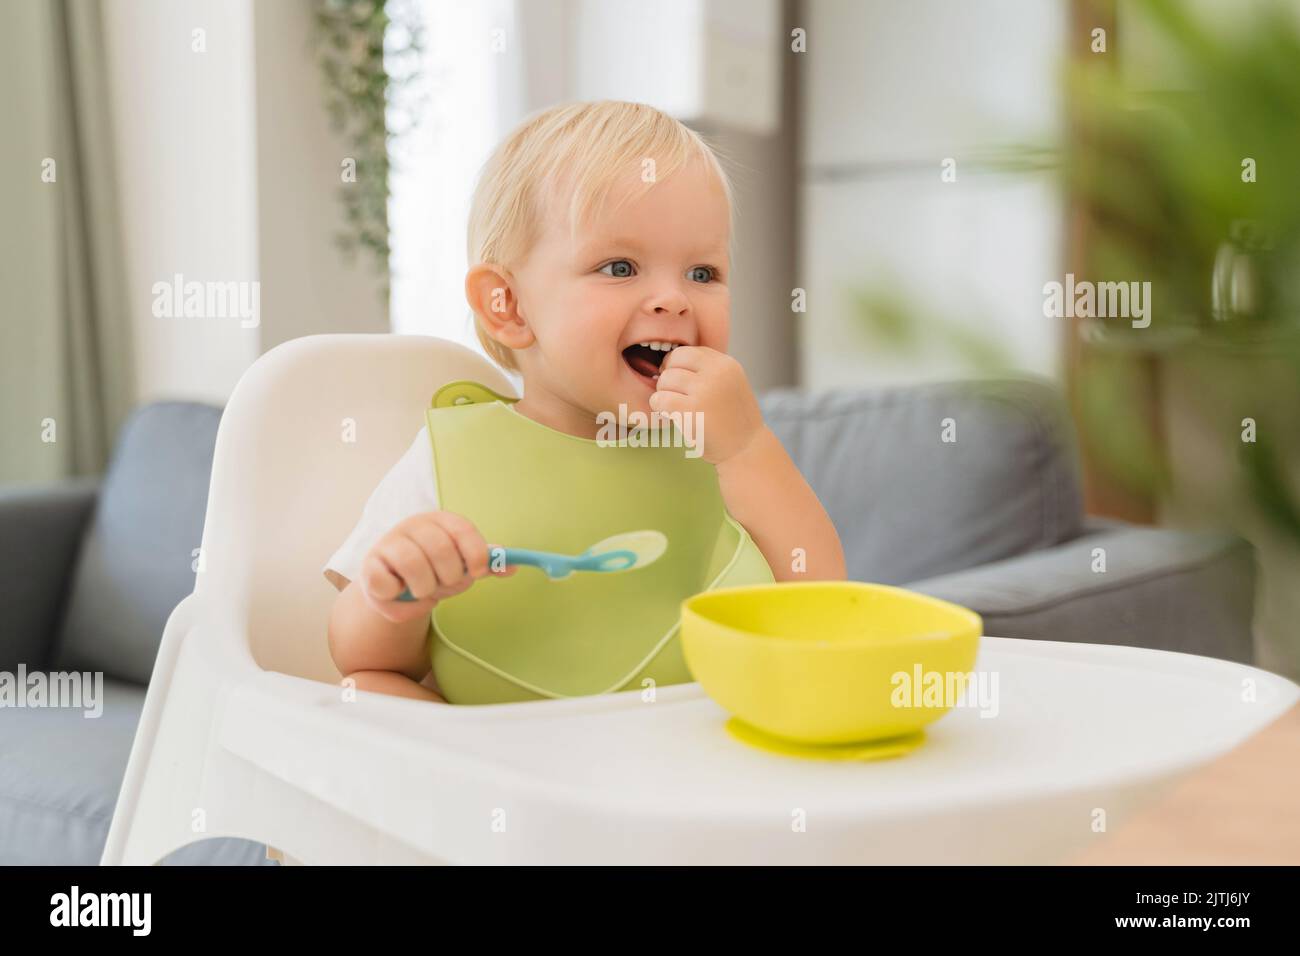 Cute little blond baby having lunch in green bib sitting at table with high chair holding spoon with meal in yellow plate in front of him, looking aside smiling, putting food in mouth with hand Stock Photo